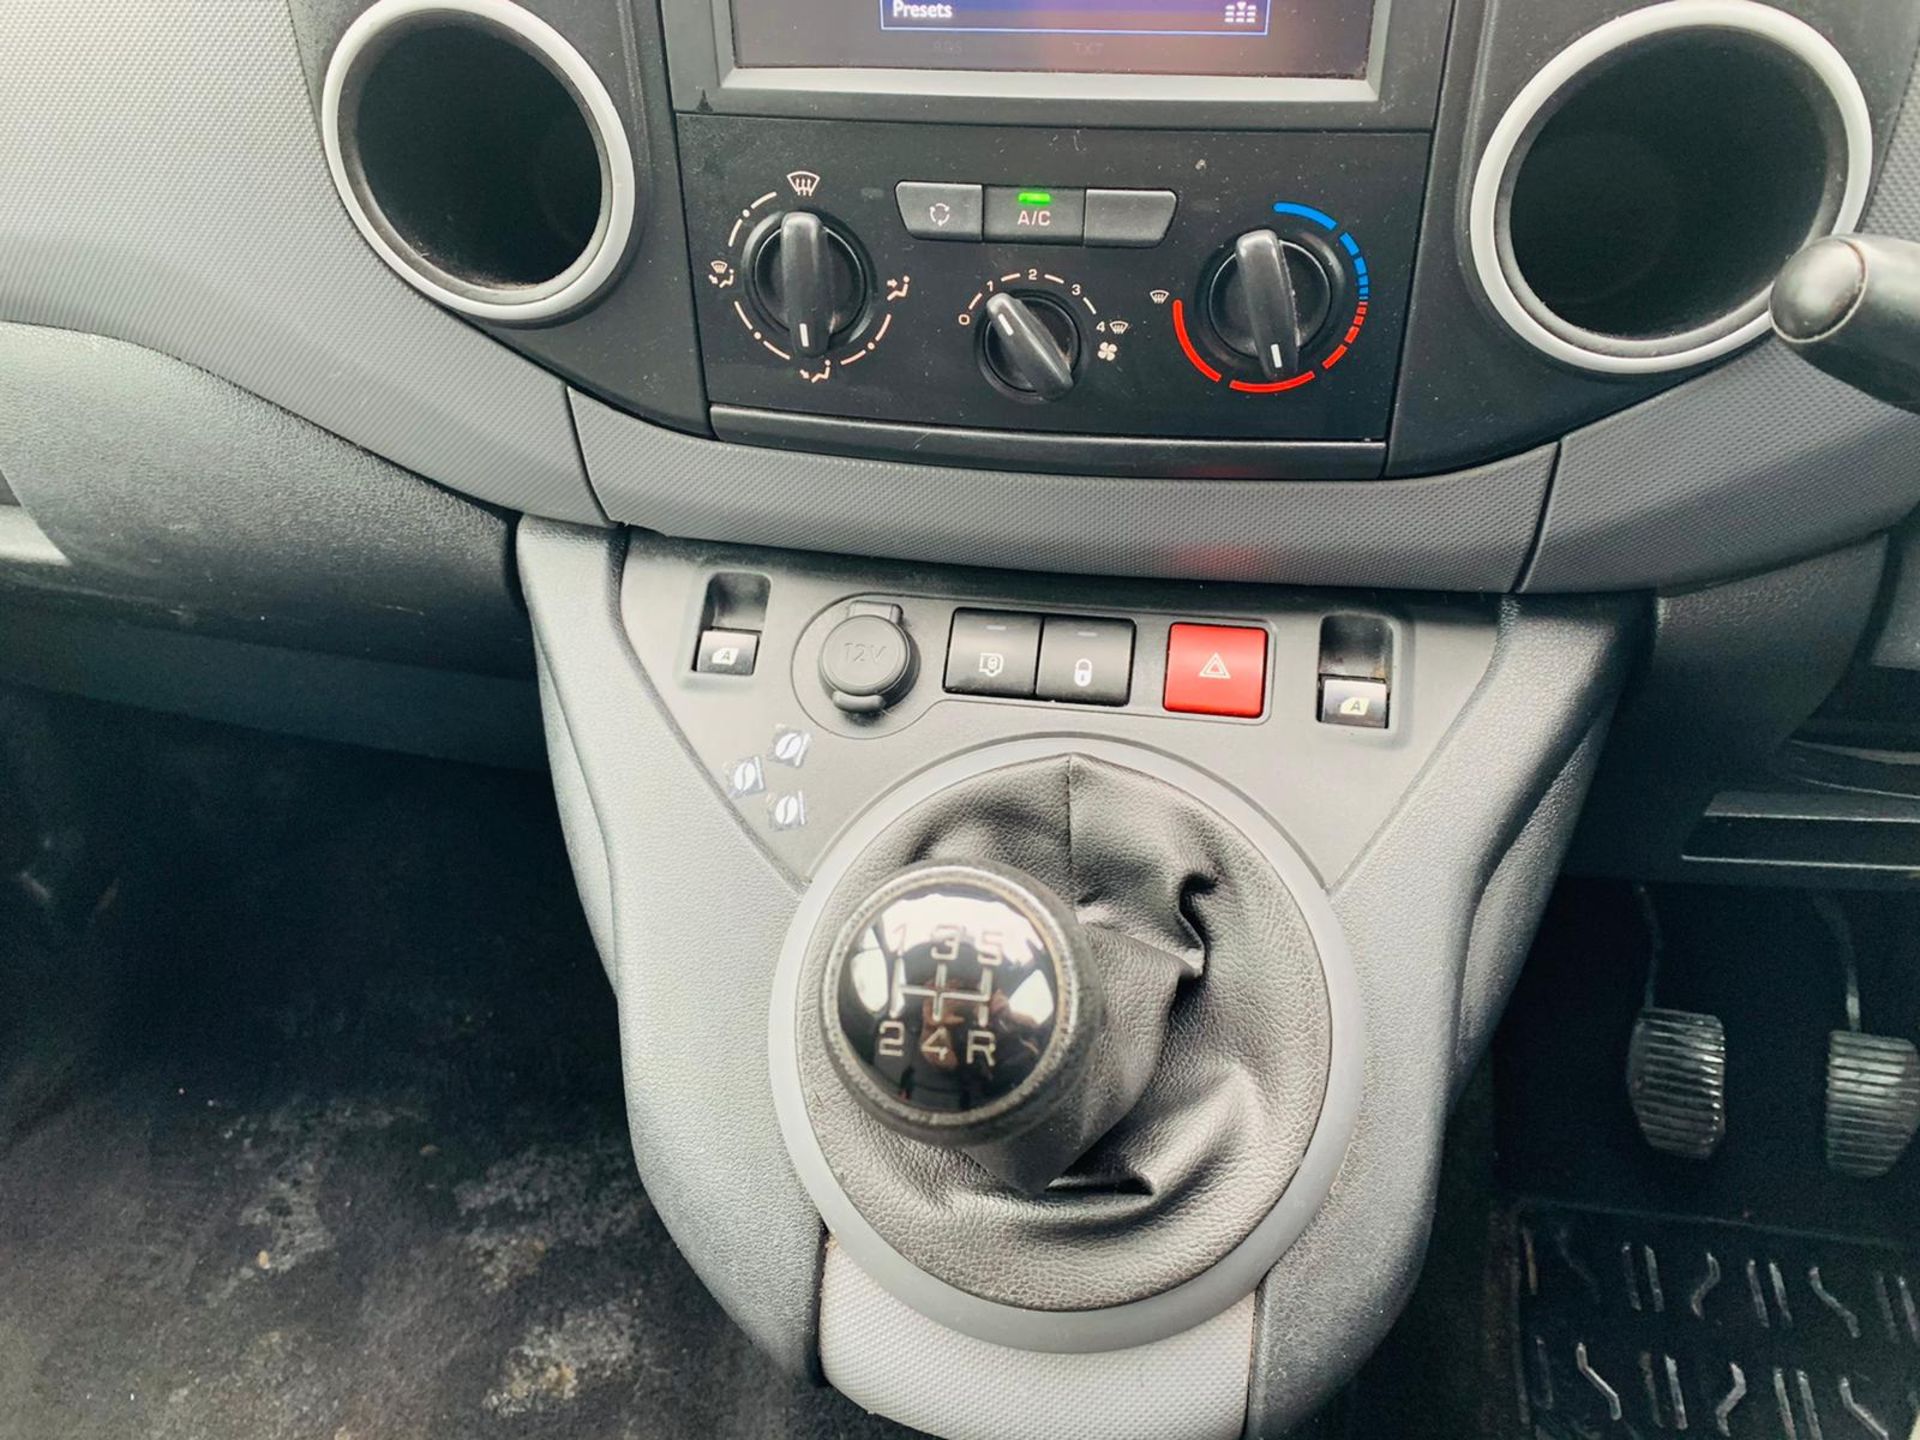 (RESERVE MET) Peugeot Partner 1.6 HDI Professional - 2017 Model - Air Con - Service History - Image 18 of 22